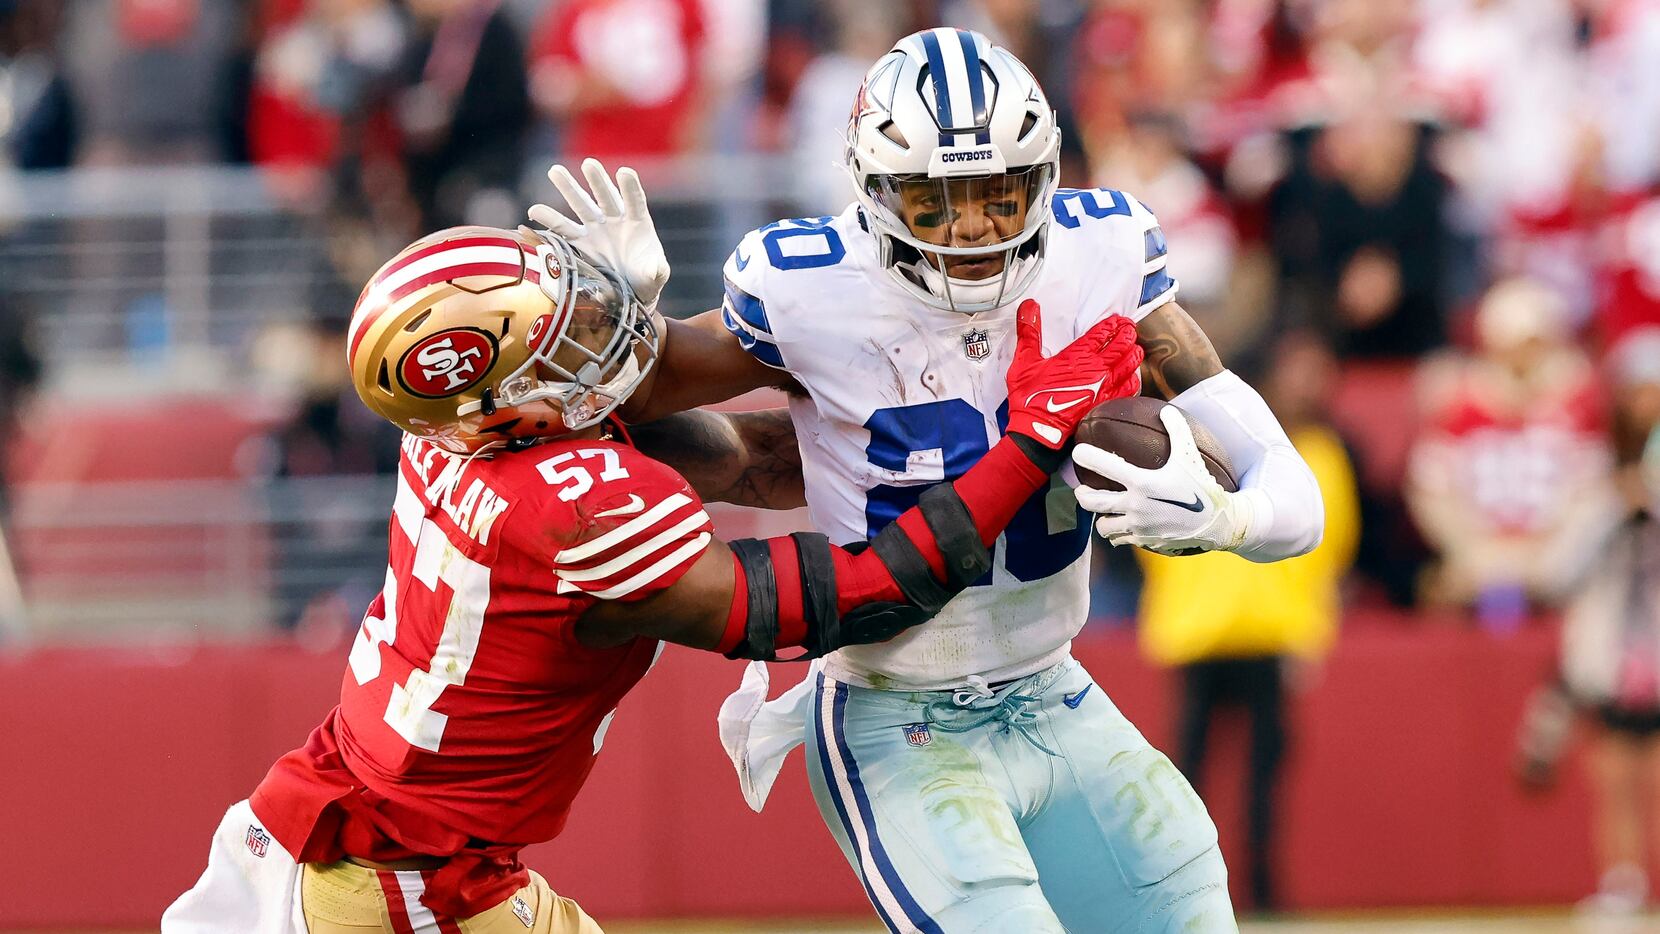 How to watch Dallas Cowboys vs San Francisco 49ers on Sunday Night